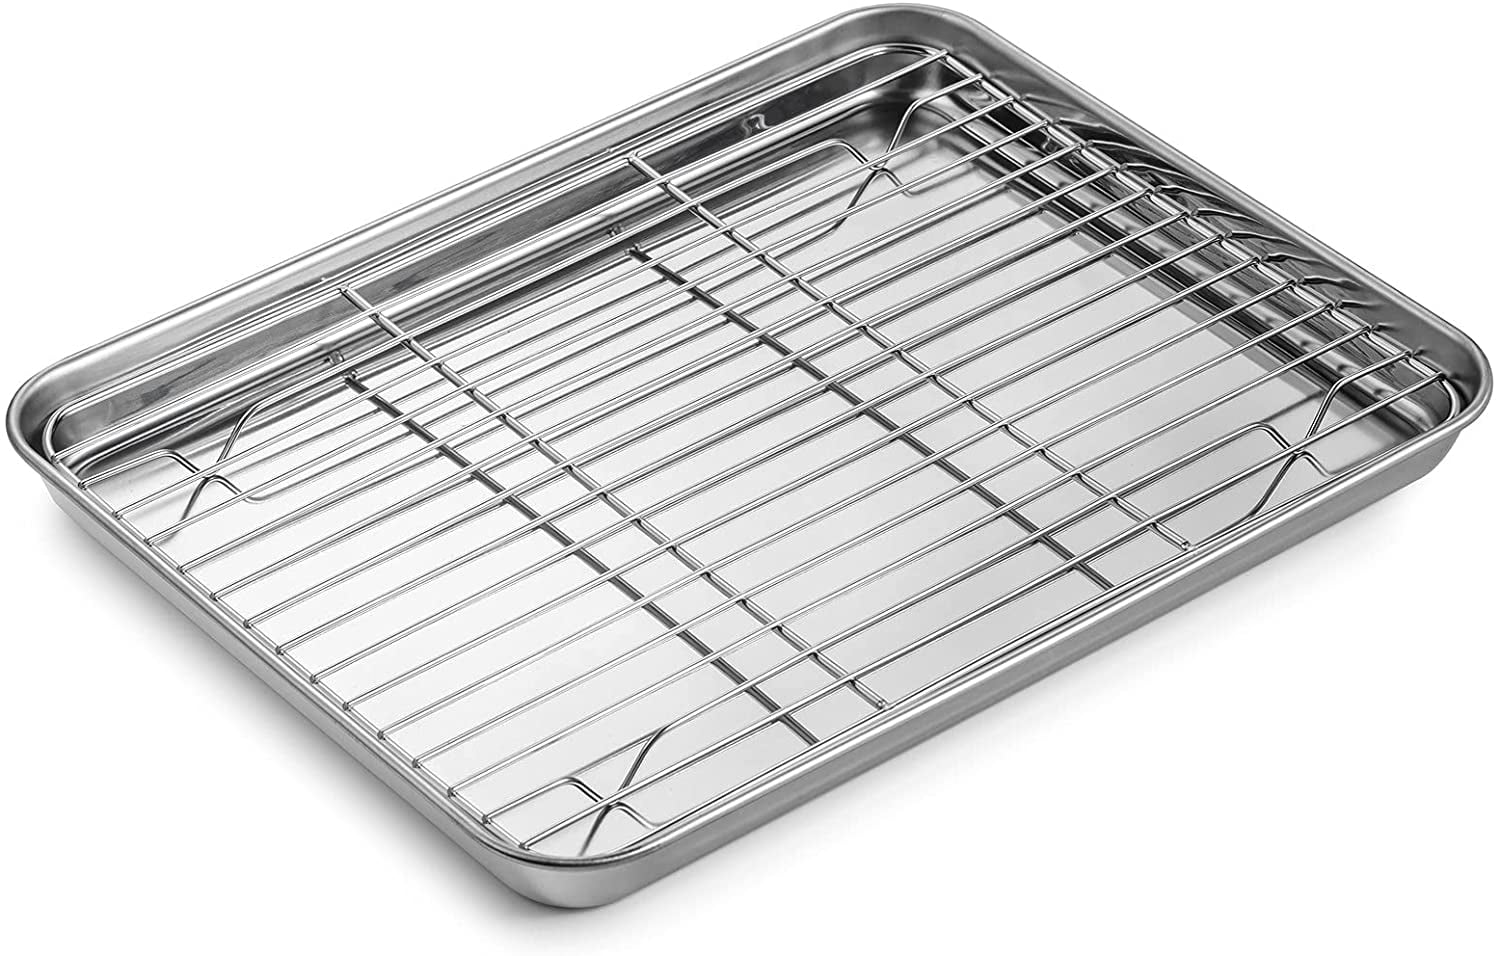 Baking Sheet Stainless Steel Baking Tray Cookie Sheet Oven Pan Rectangle Size 12 1/2 x 9 3/4 x 1, Non Toxic & Healthy, Rust Free & Less Stick, Thick & Sturdy, Easy Clean & Dishwasher Safe WEZVIX